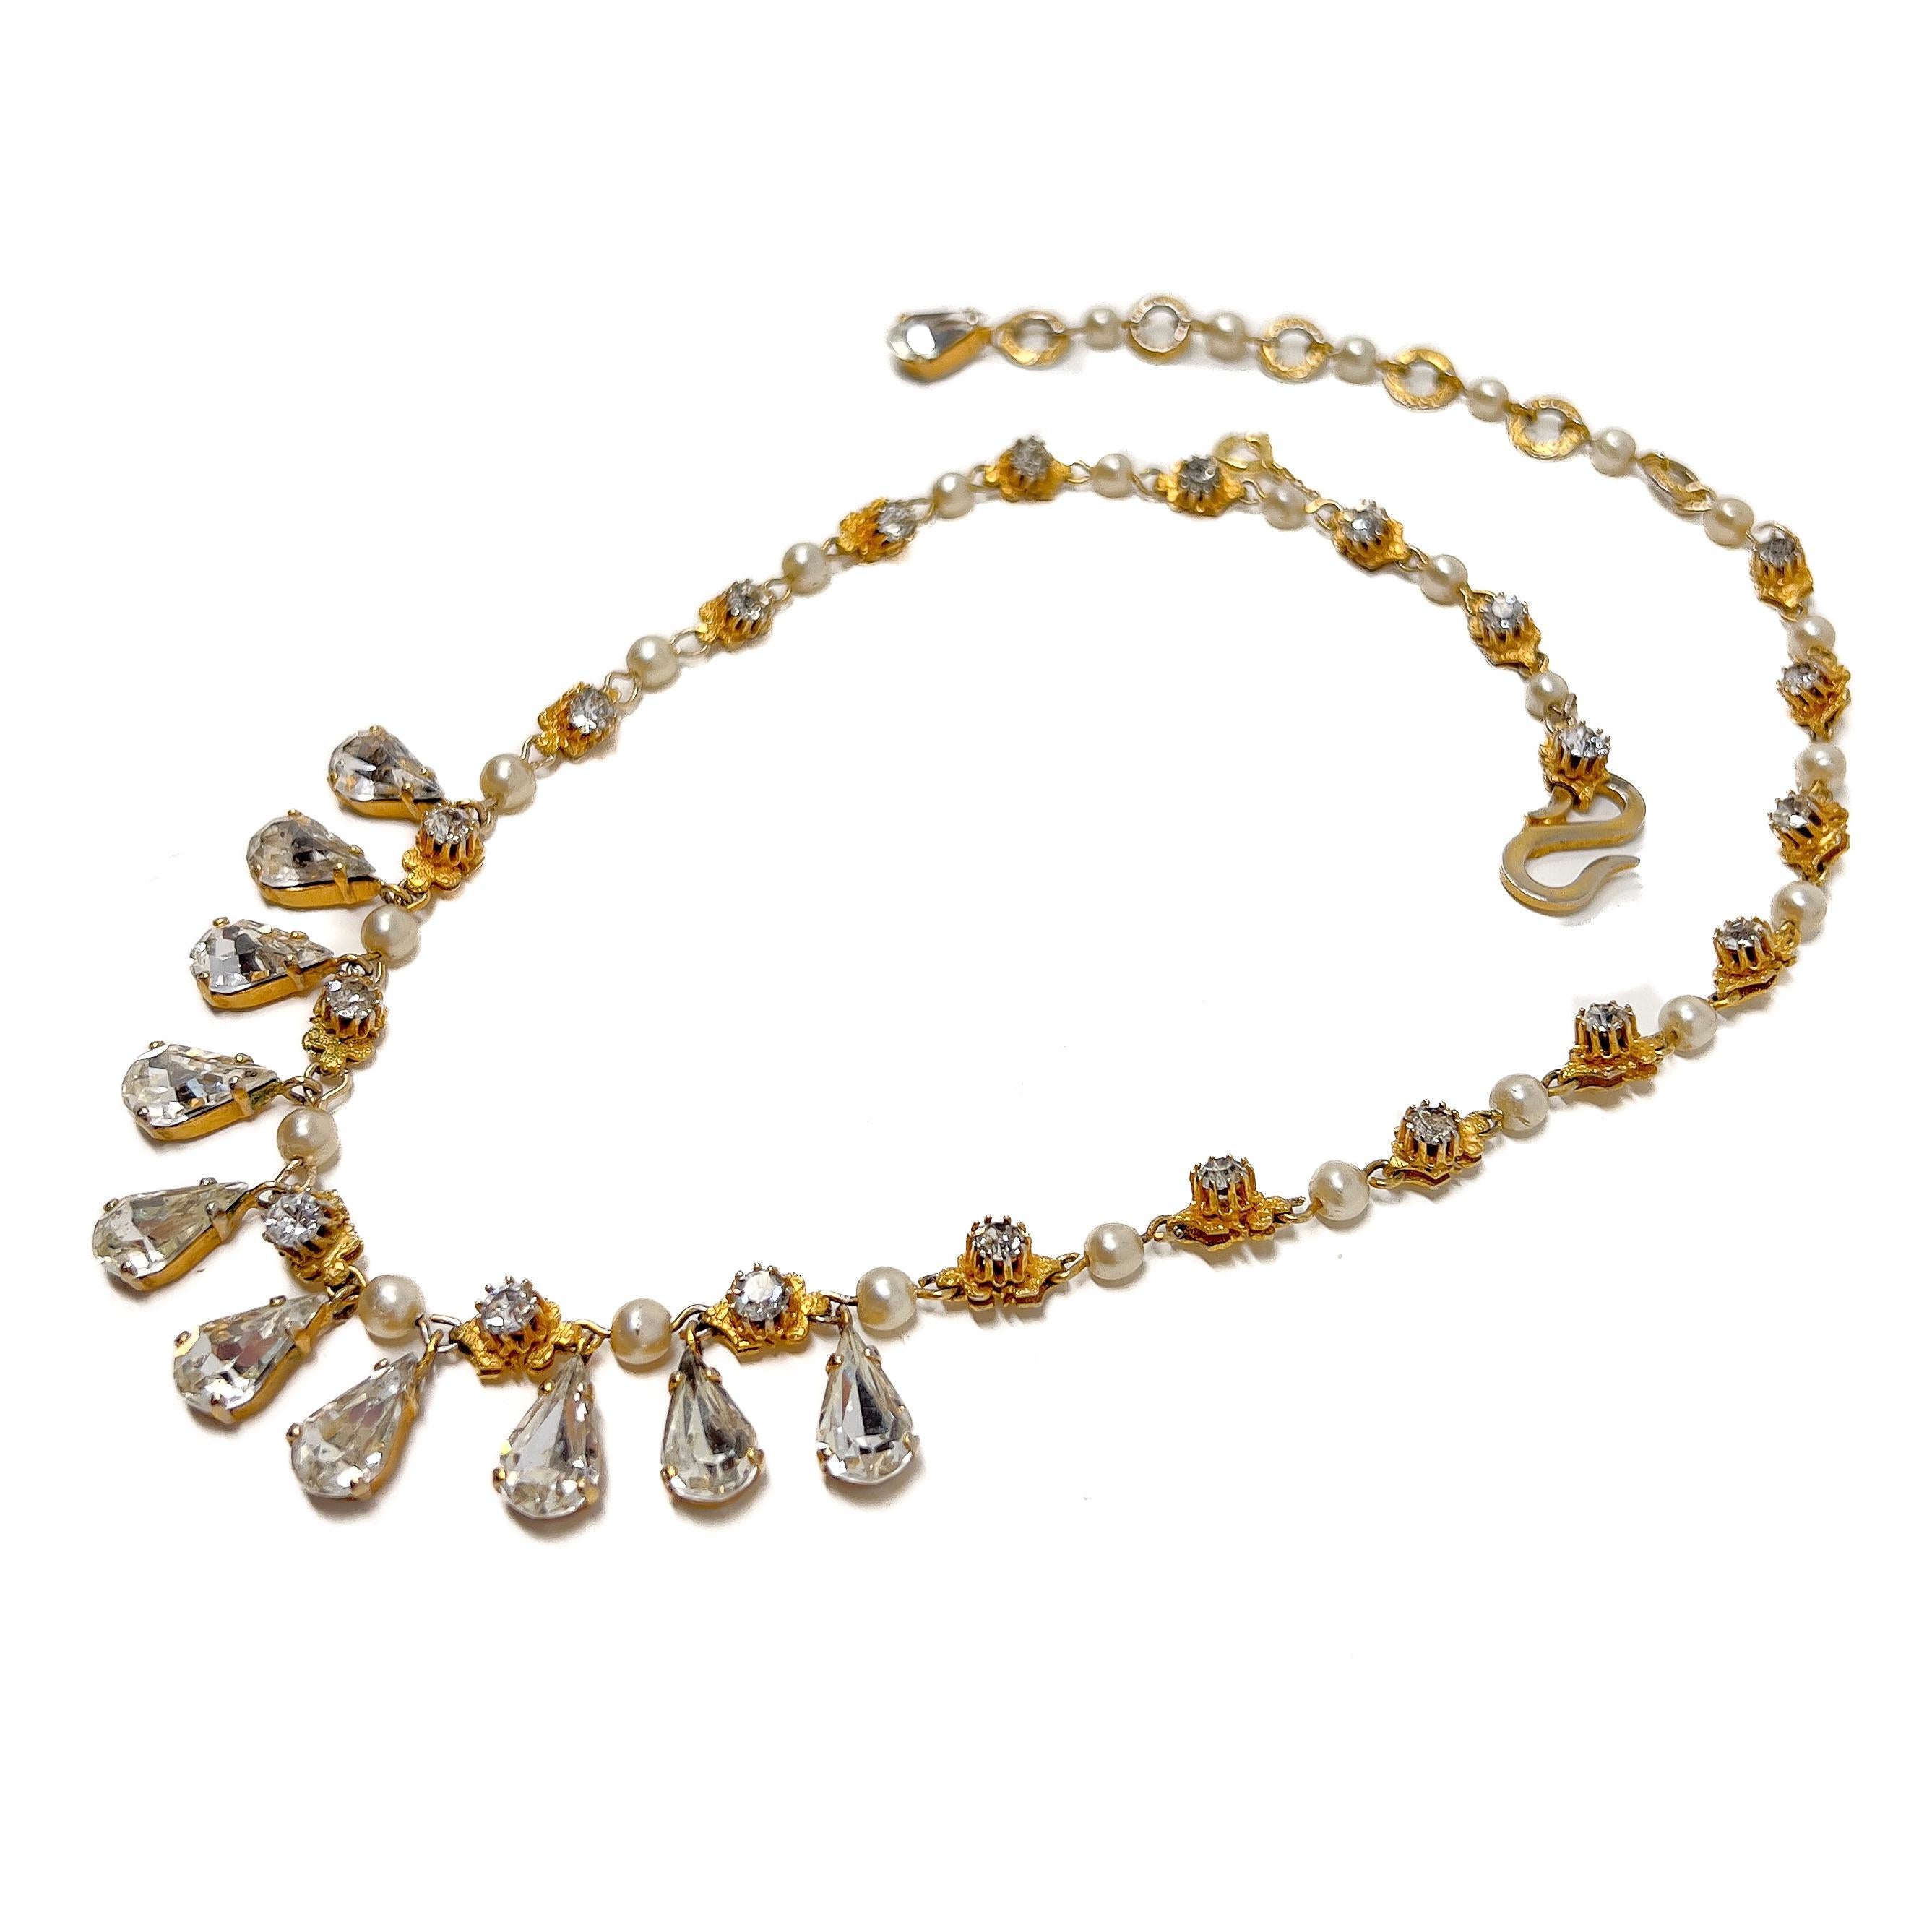 Women's Christian Dior by Mitchel Maer 1952-1956 Vintage Rhinestone and Pearl Necklace For Sale